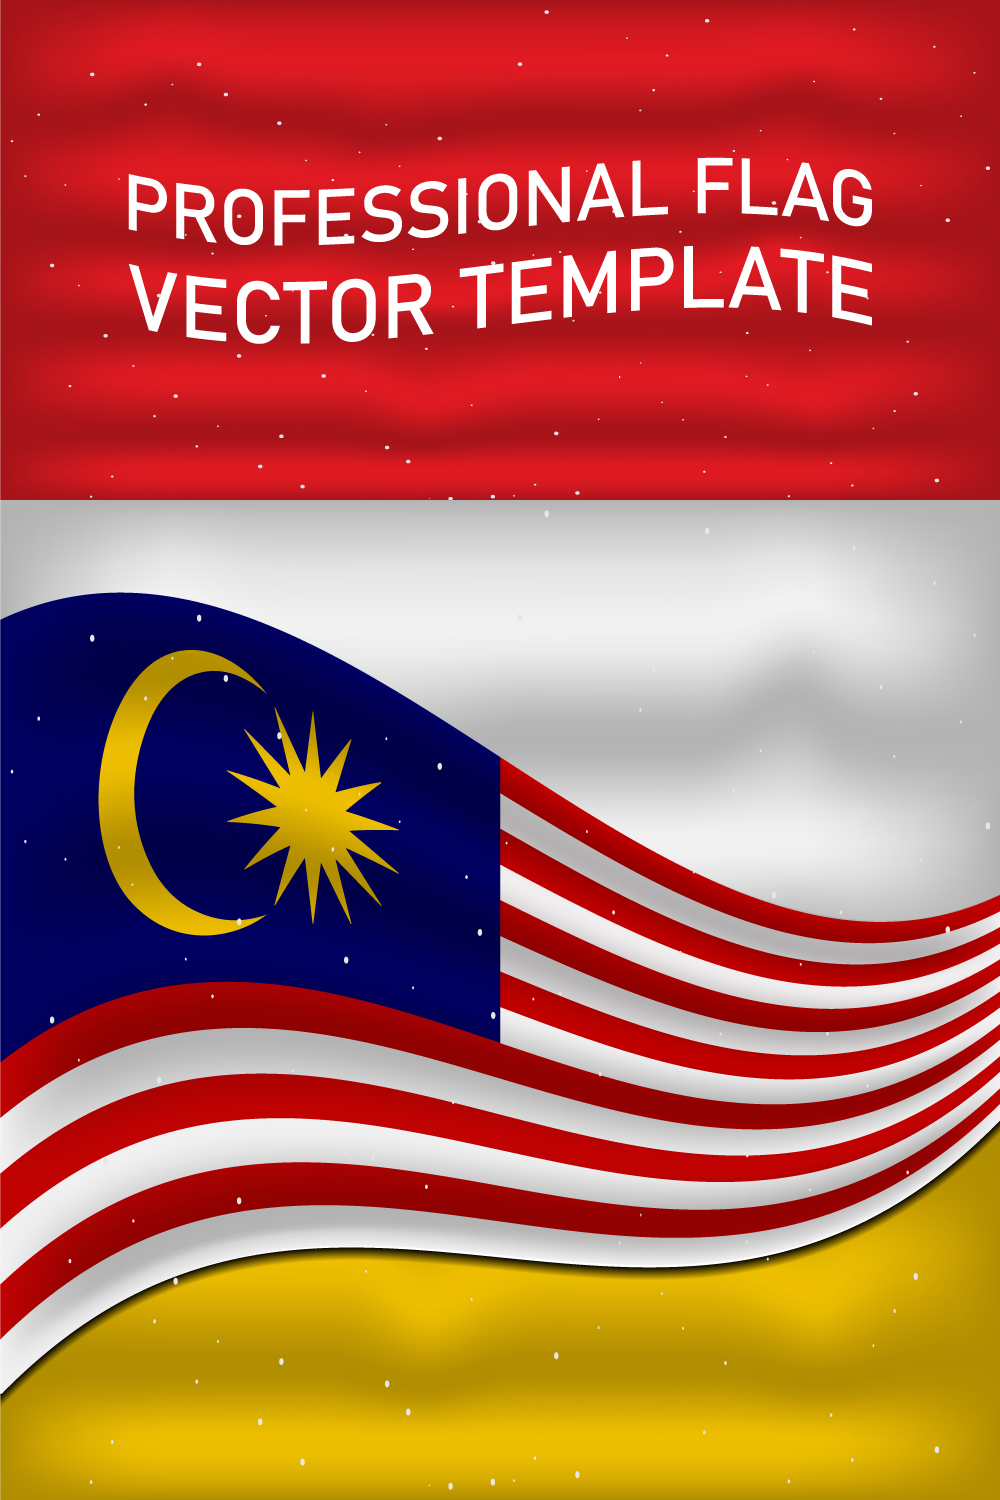 Charming image of the flag of Malaysia.